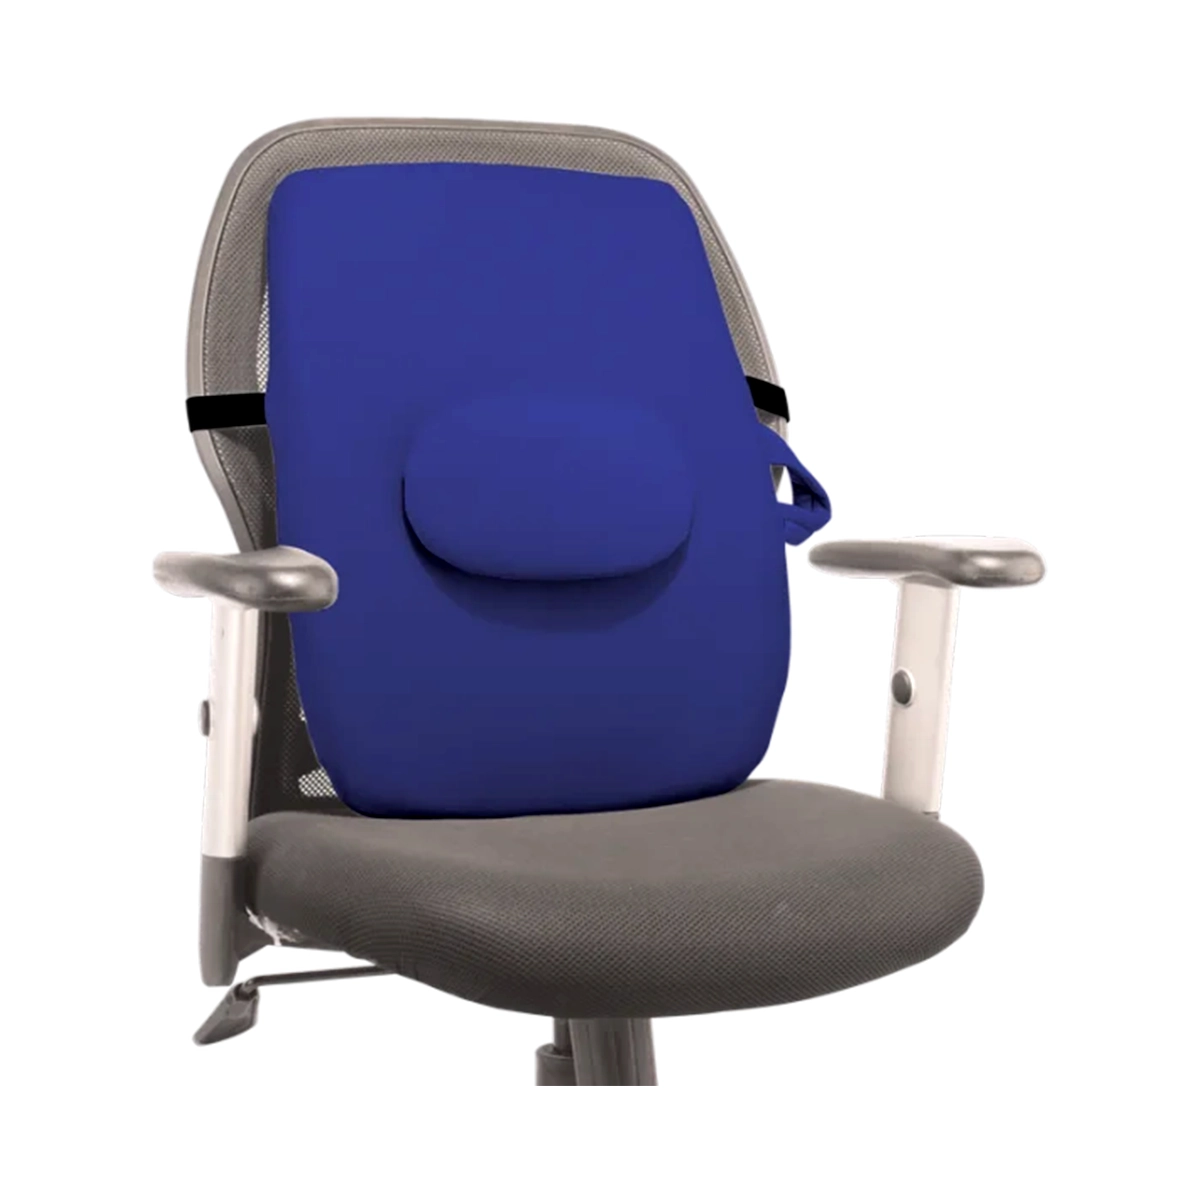 First product image of Flamingo Back Rest Blue OC 2144 L